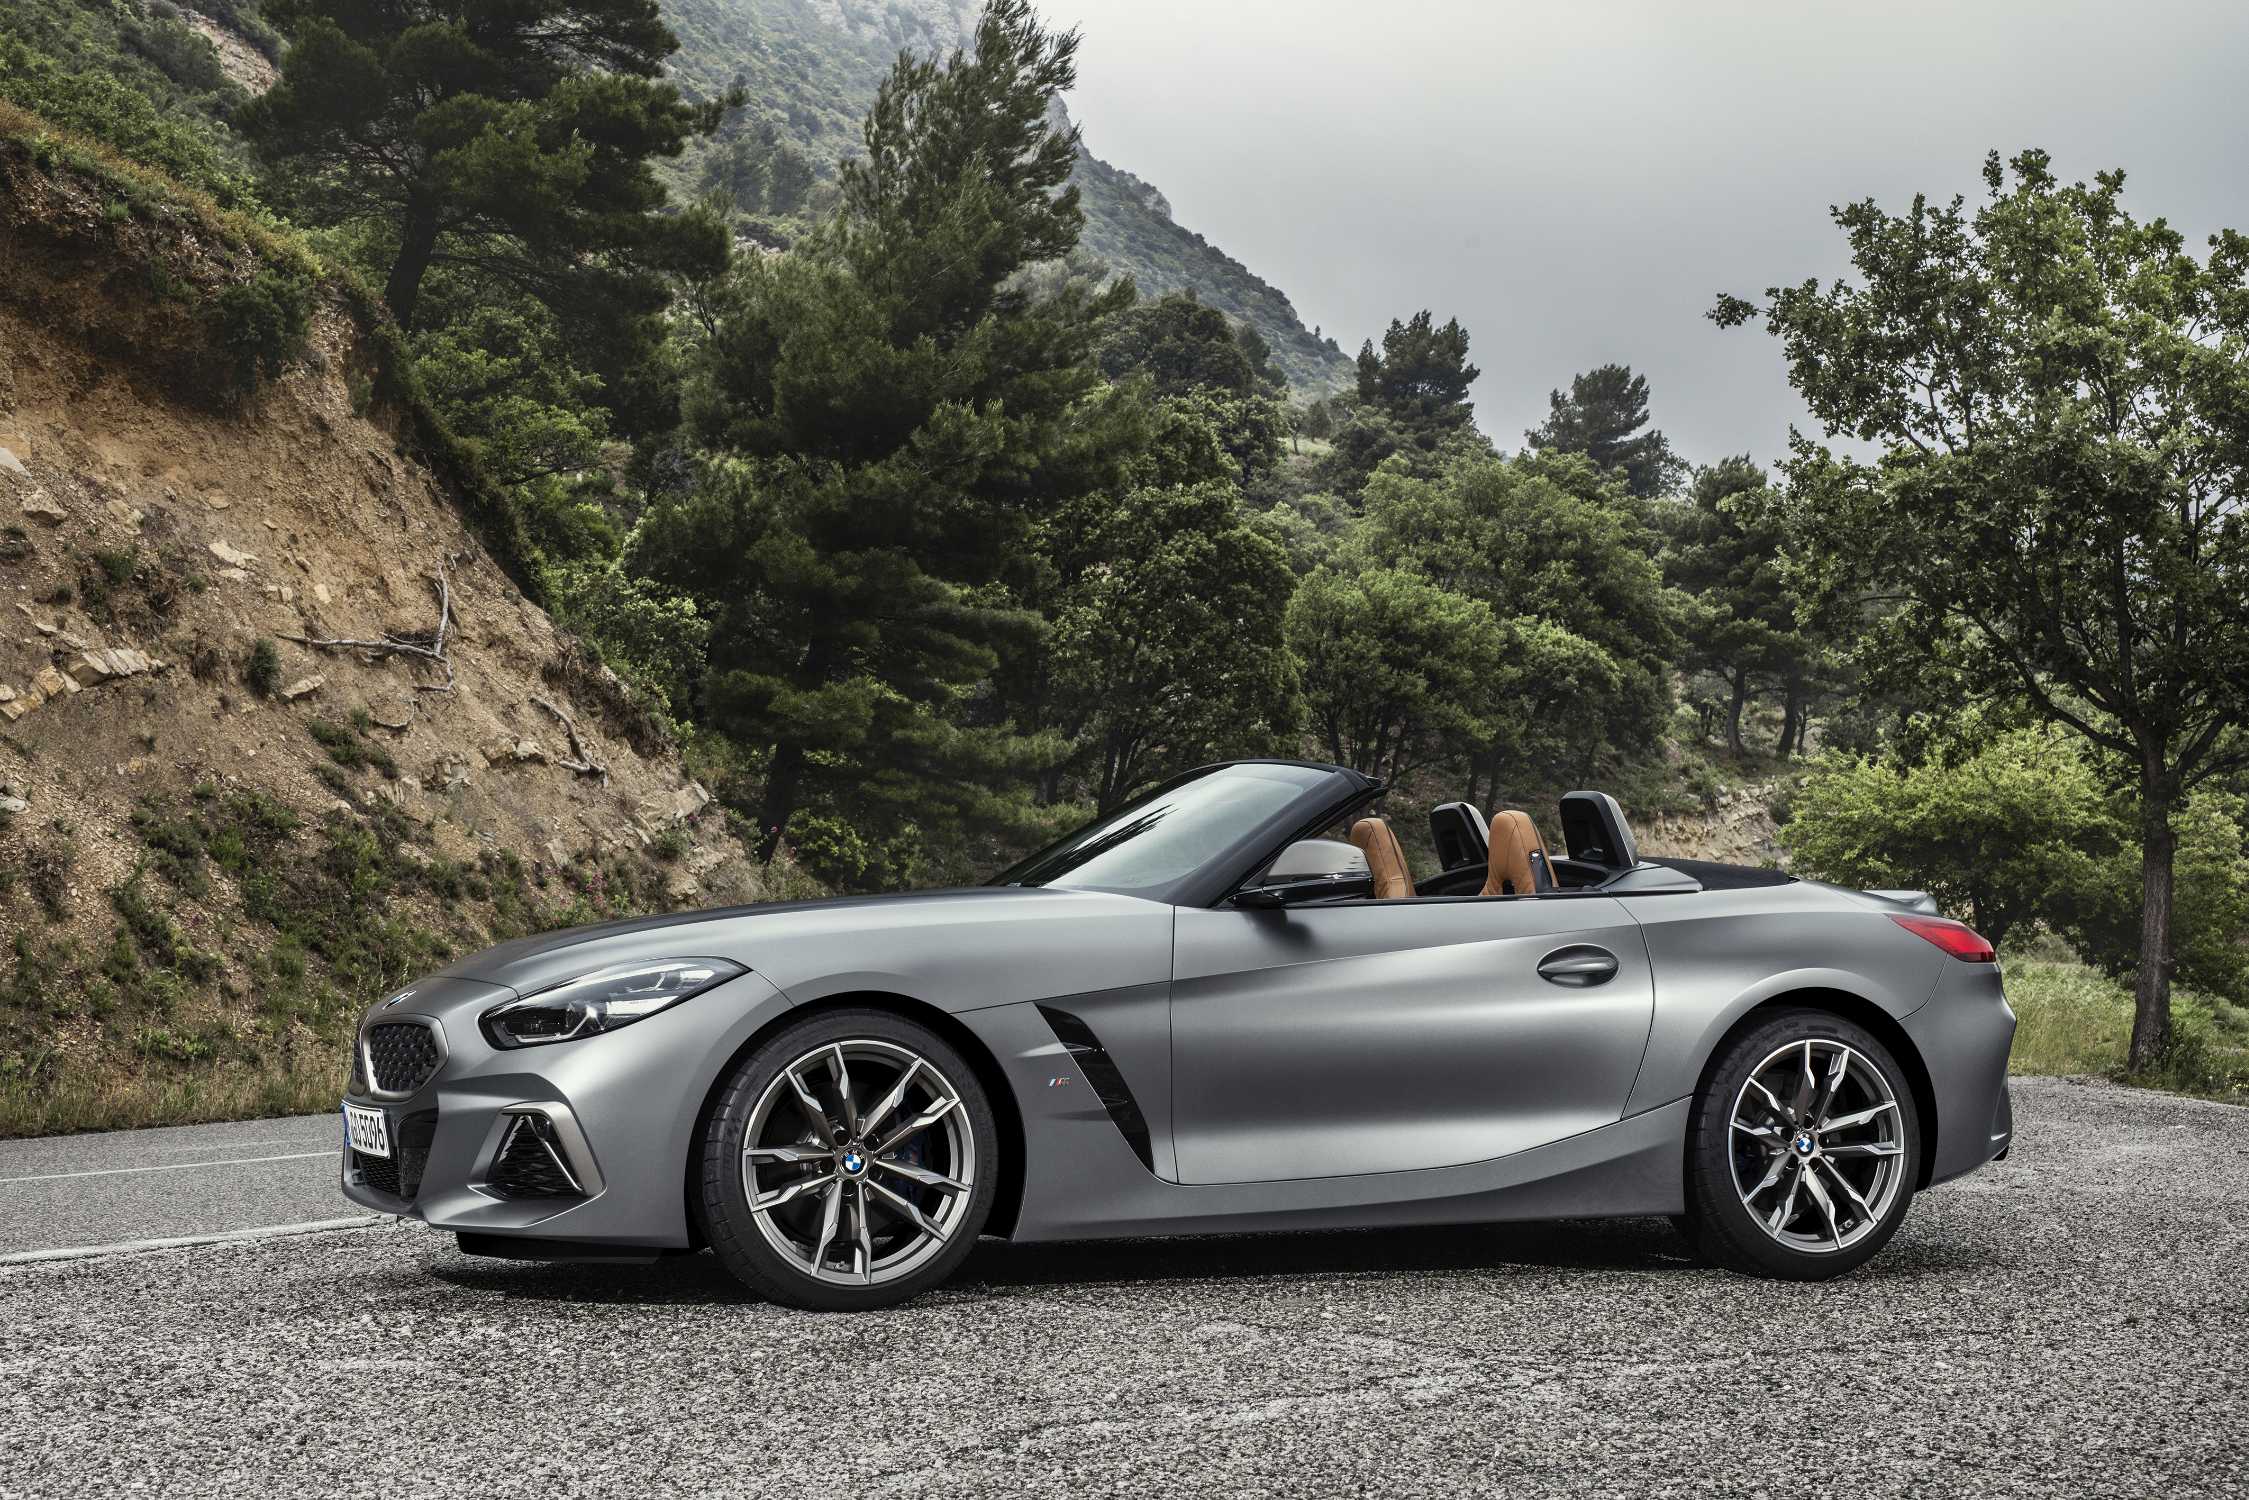 The new BMW Z4 Roadster (09/2018).